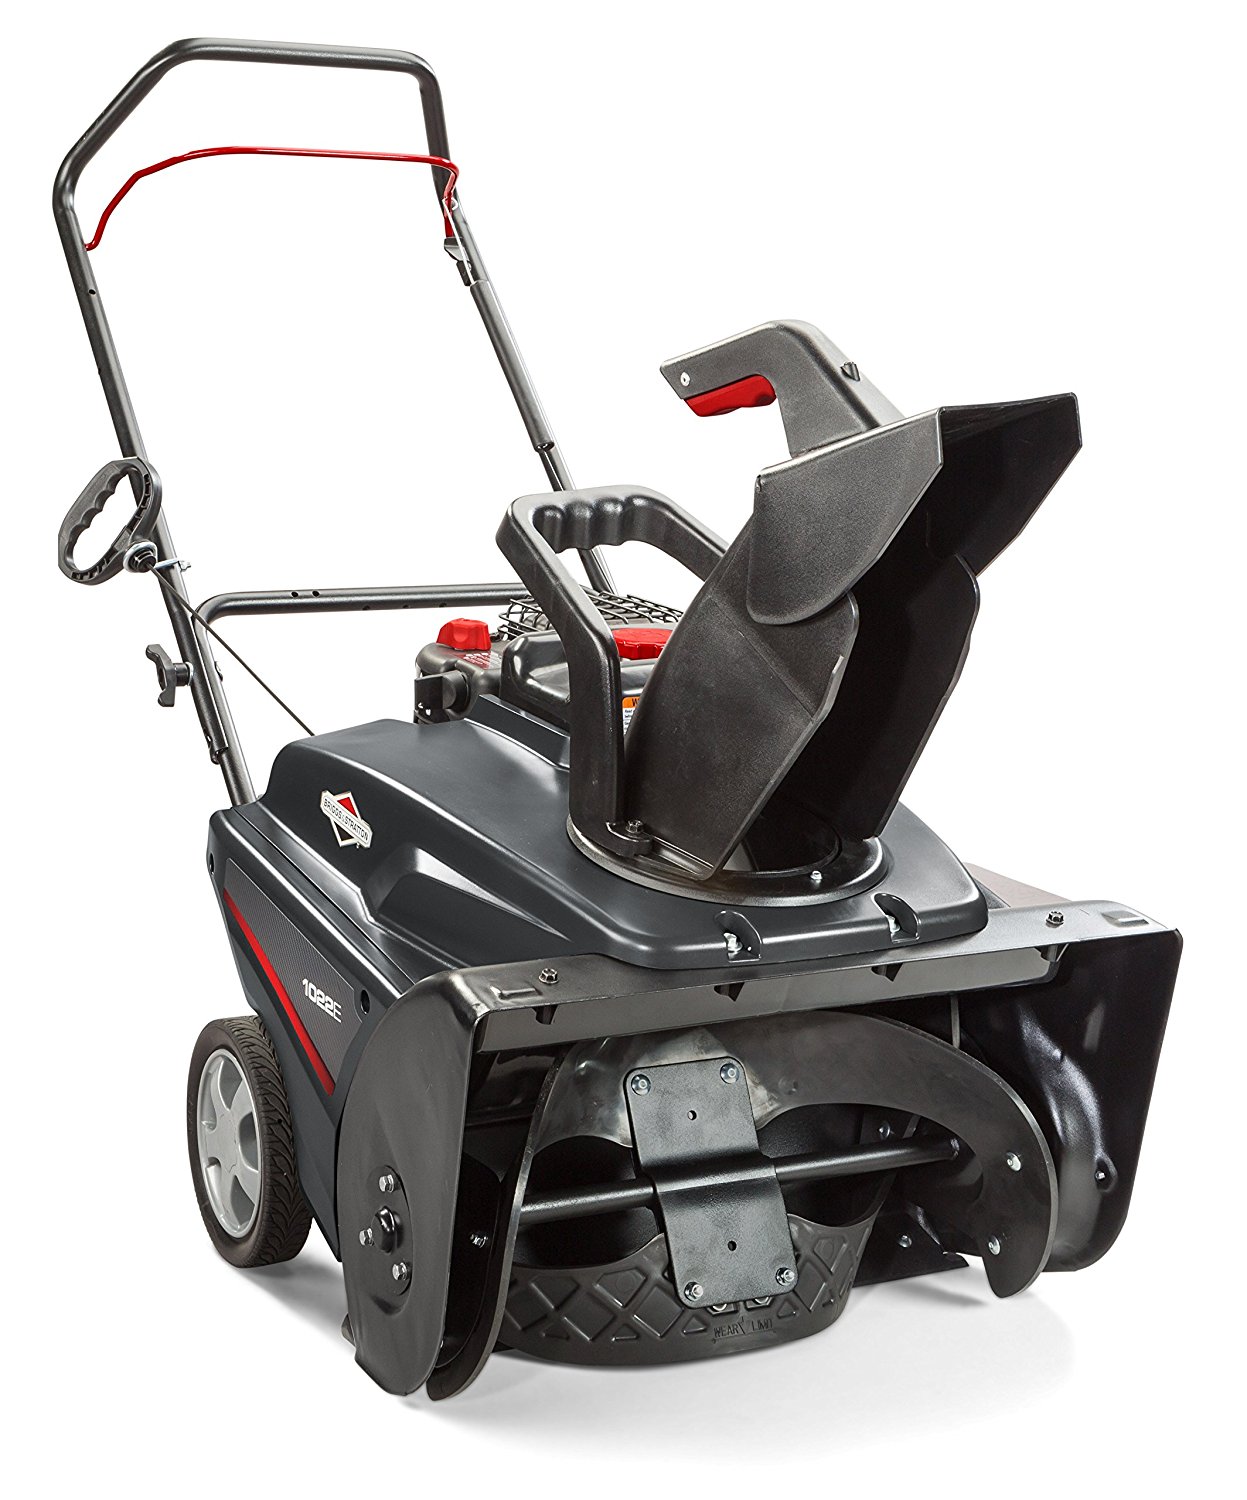 Briggs and Stratton Power Products Briggs & Stratton 1696737 Single Stage Snow Thrower with 208cc Engine, 22